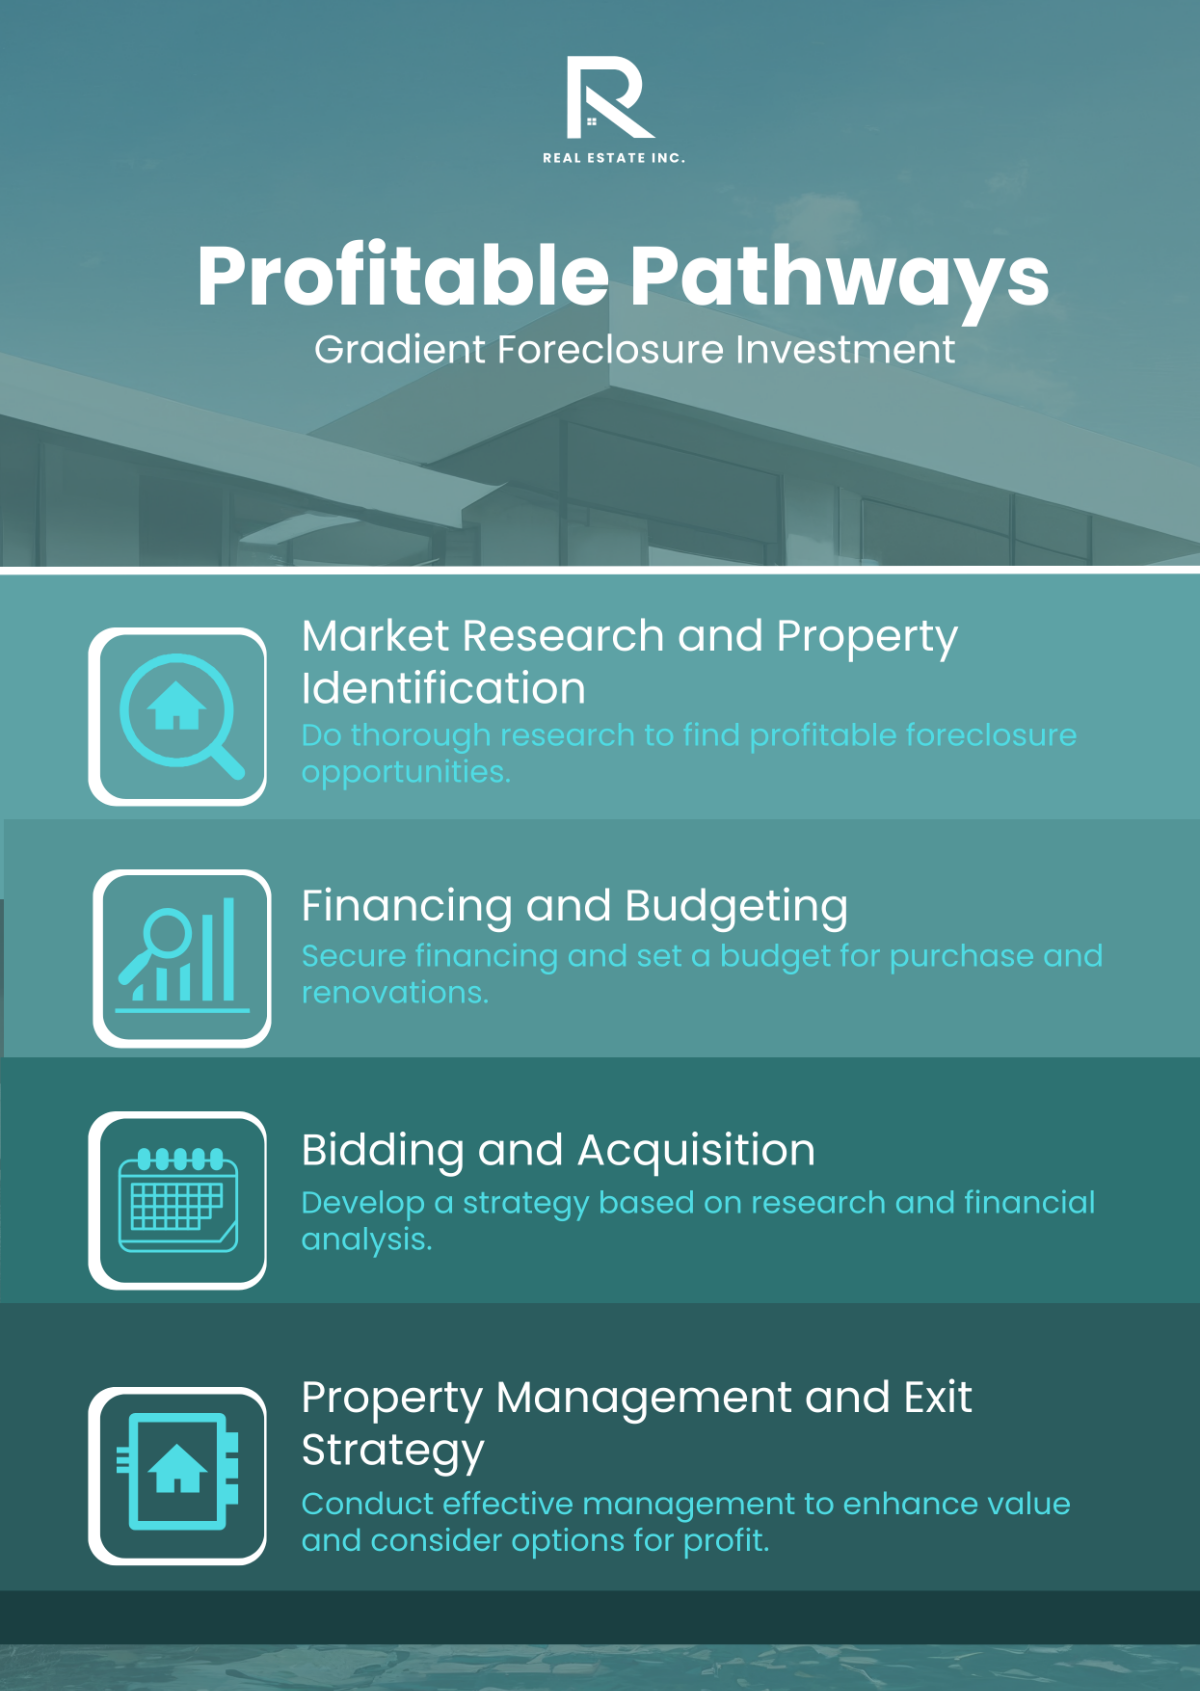 Real Estate Gradient Foreclosure Investment Infographic Template